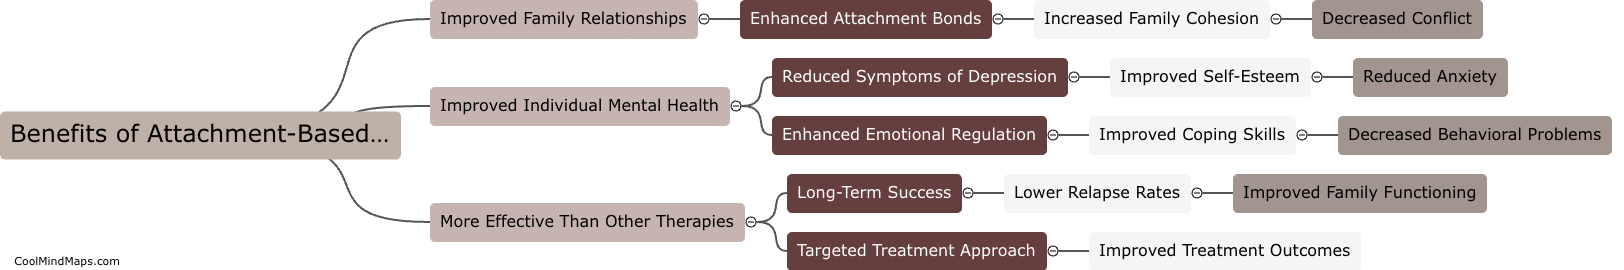 What are the benefits of attachment-based family therapy?